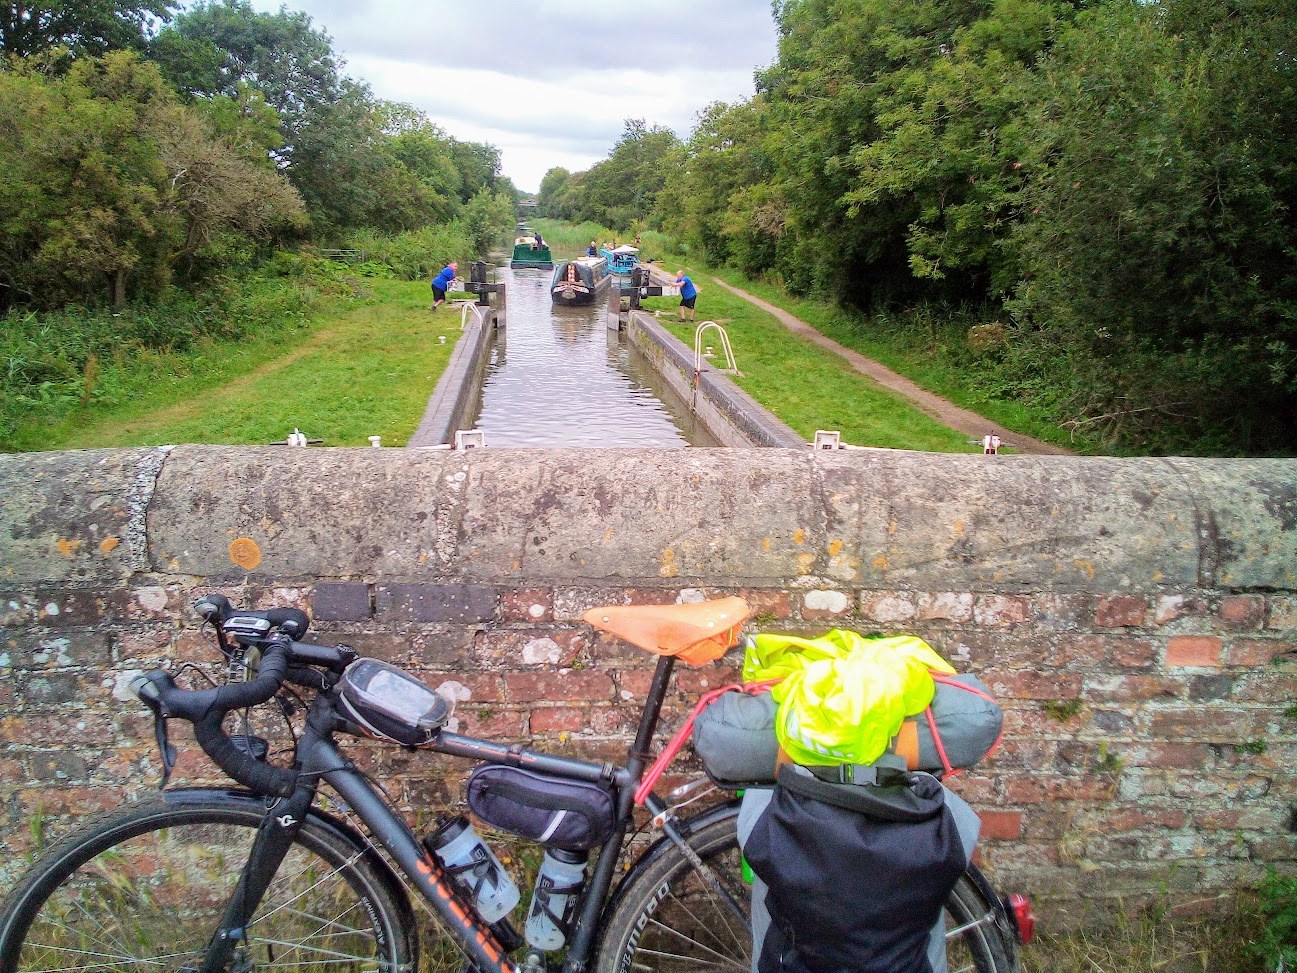 A picture of my laden bicycle, taken on a bridge, while cycling the Kennet And Avon Canal cycle route